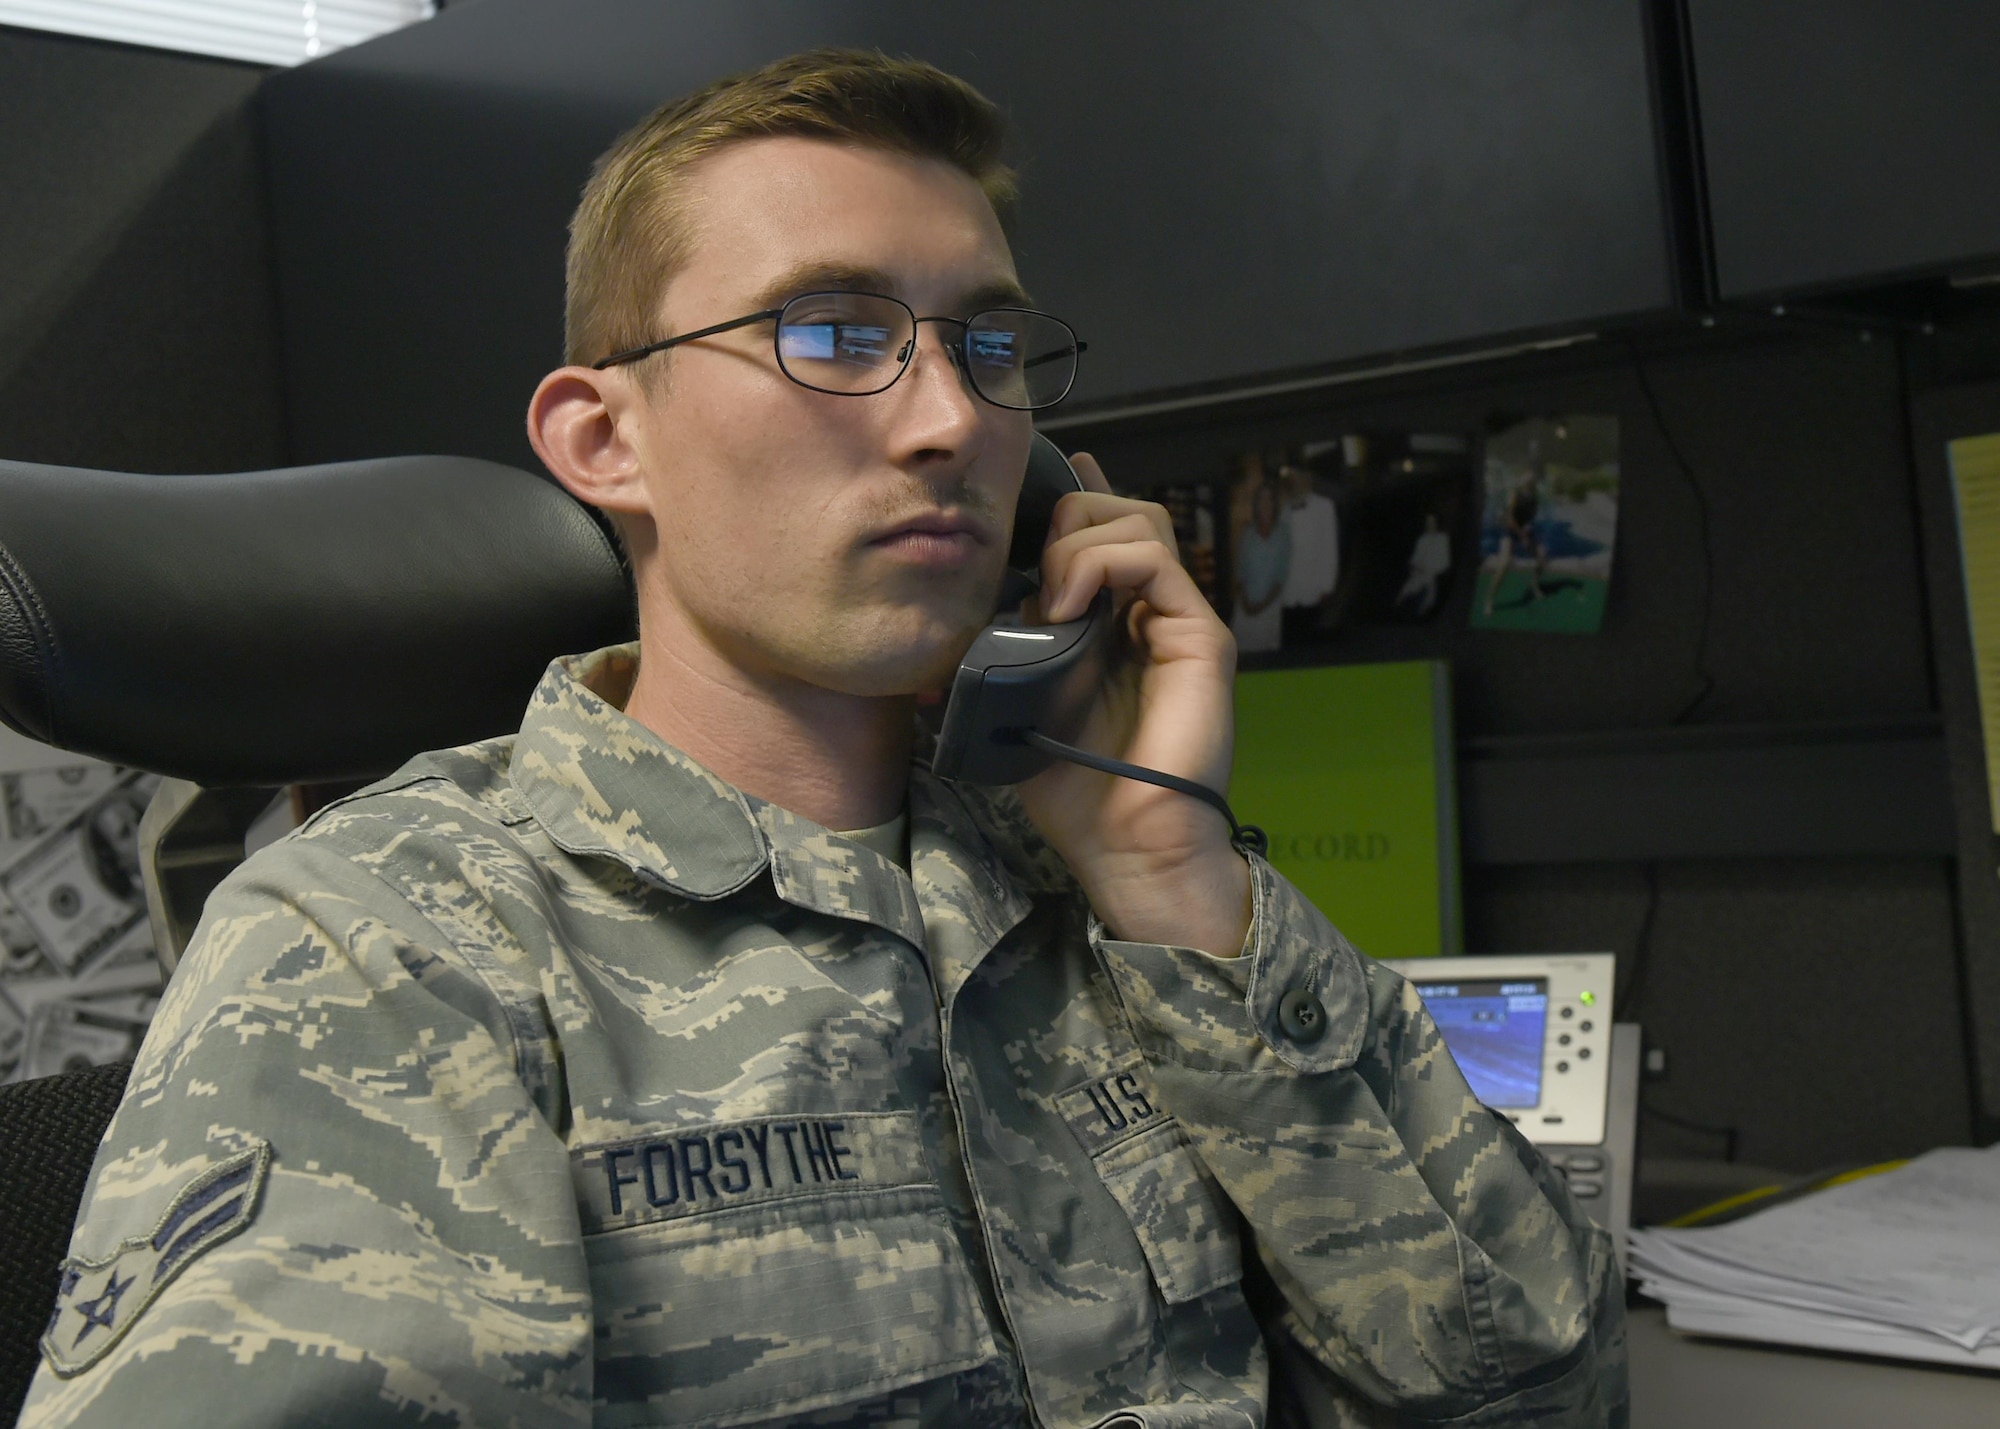 U.S. Air Force Airman 1st Class Trevor Forsythe, 97th Contracting Flight contracting specialist, speaks with a client, August 17, 2016, at Altus Air Force Base Okla. The 97th Contracting Flight is responsible for making large military purchases such as equipment and hiring contractor to support Altus’ mission of forging combat mobility forces and deploying Airman warriors. (U.S. Air Force photo by Airman 1st Class Kirby Turbak/Released) 